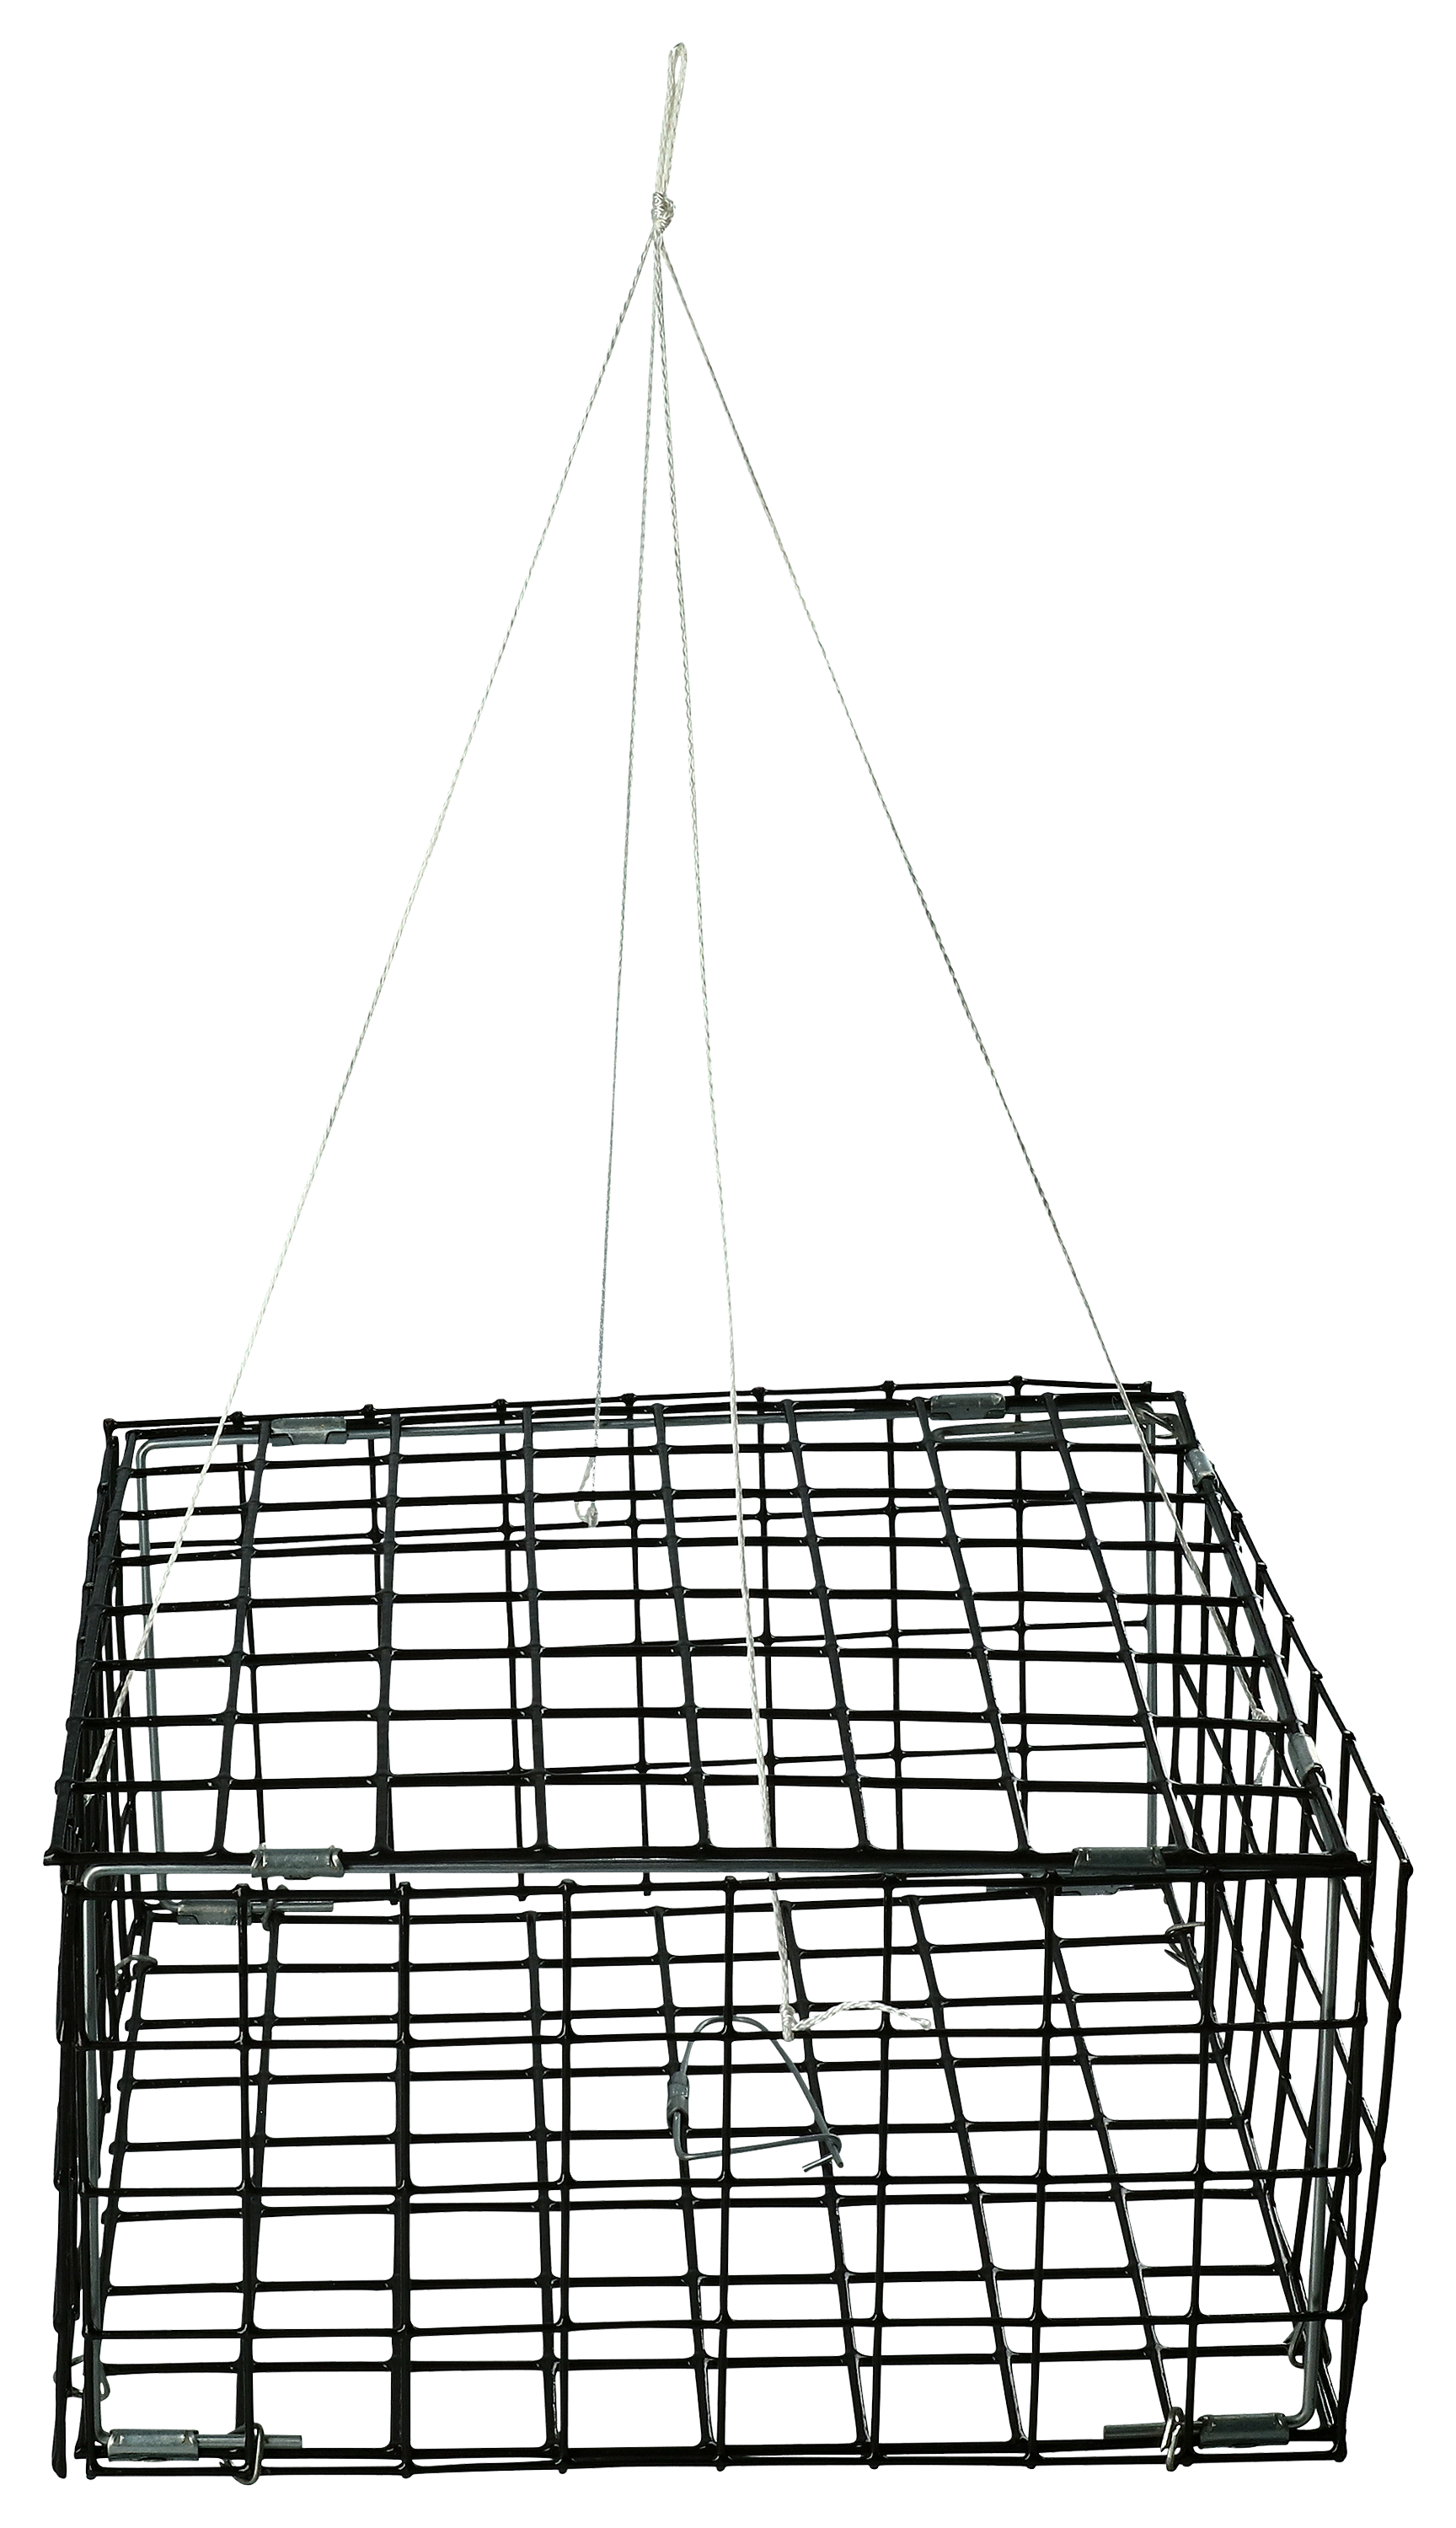 Buy 3 Sporty Crab Traps Are BEST. Experience the Sport of Casting